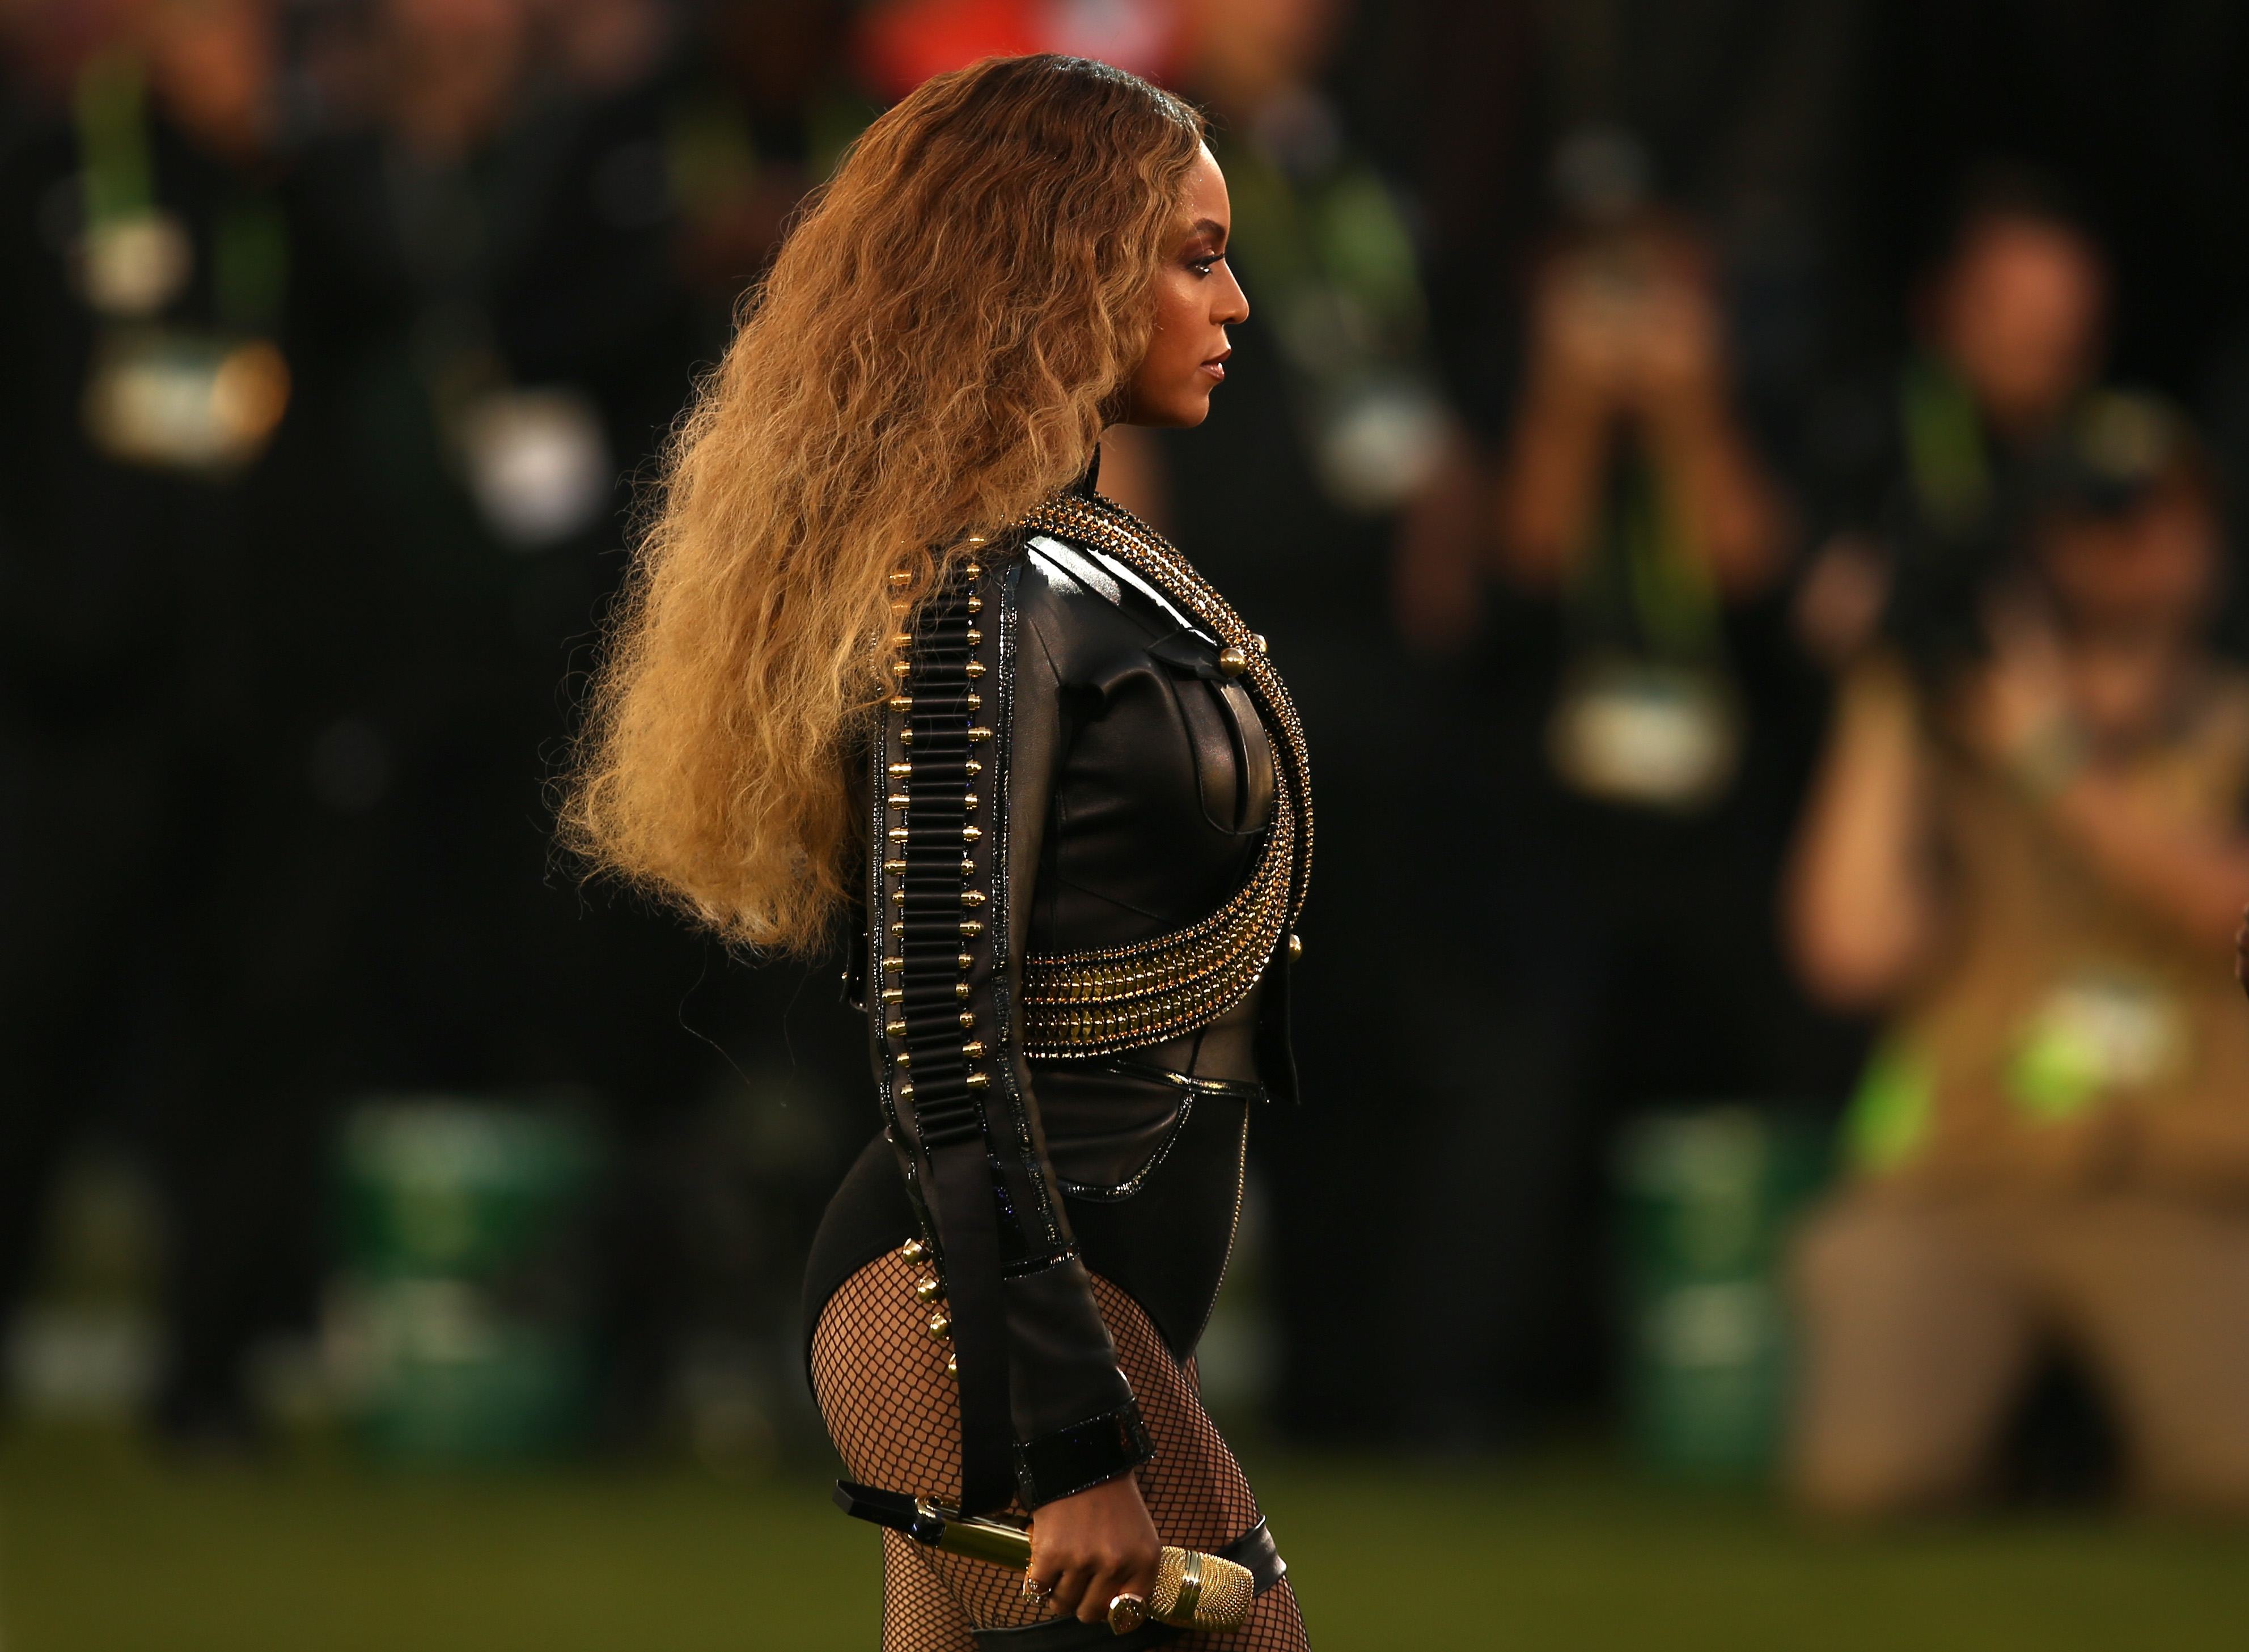 Beyonce performs onstage during the Pepsi Super Bowl 50 Halftime Show at Levi's Stadium in Santa Clara, Calif., on Feb. 7, 2016. (Matt Cowan—Getty Images)